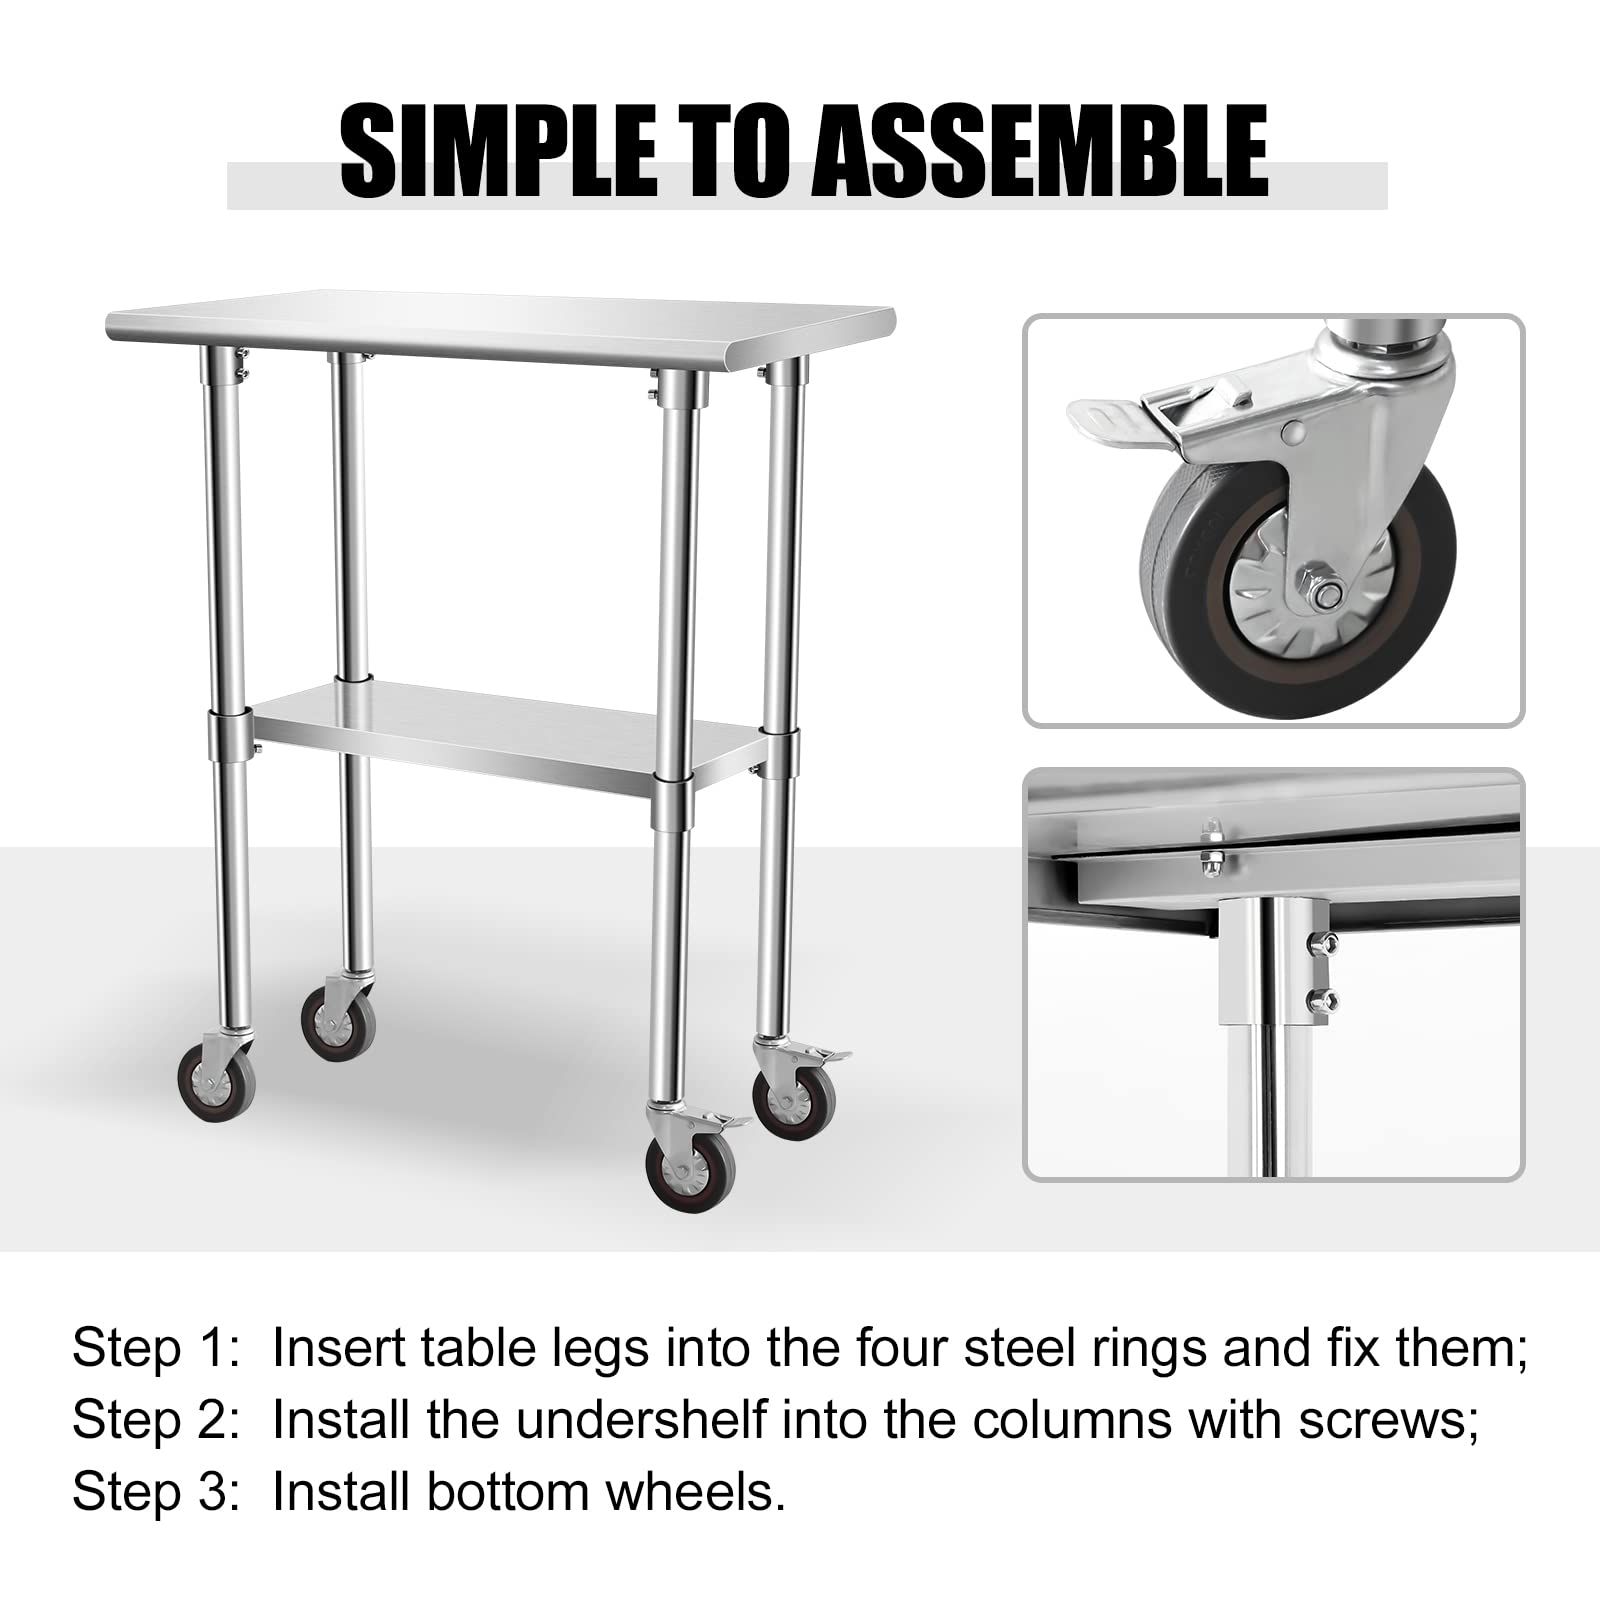 KODOM Food Prep Stainless Steel Table 30" x 18", Heavy Duty Workbench with Adjustable Under Shelf, Commercial Worktable with 4 Casters for Commerical Kitchen, Restaurant, Home and Hotel